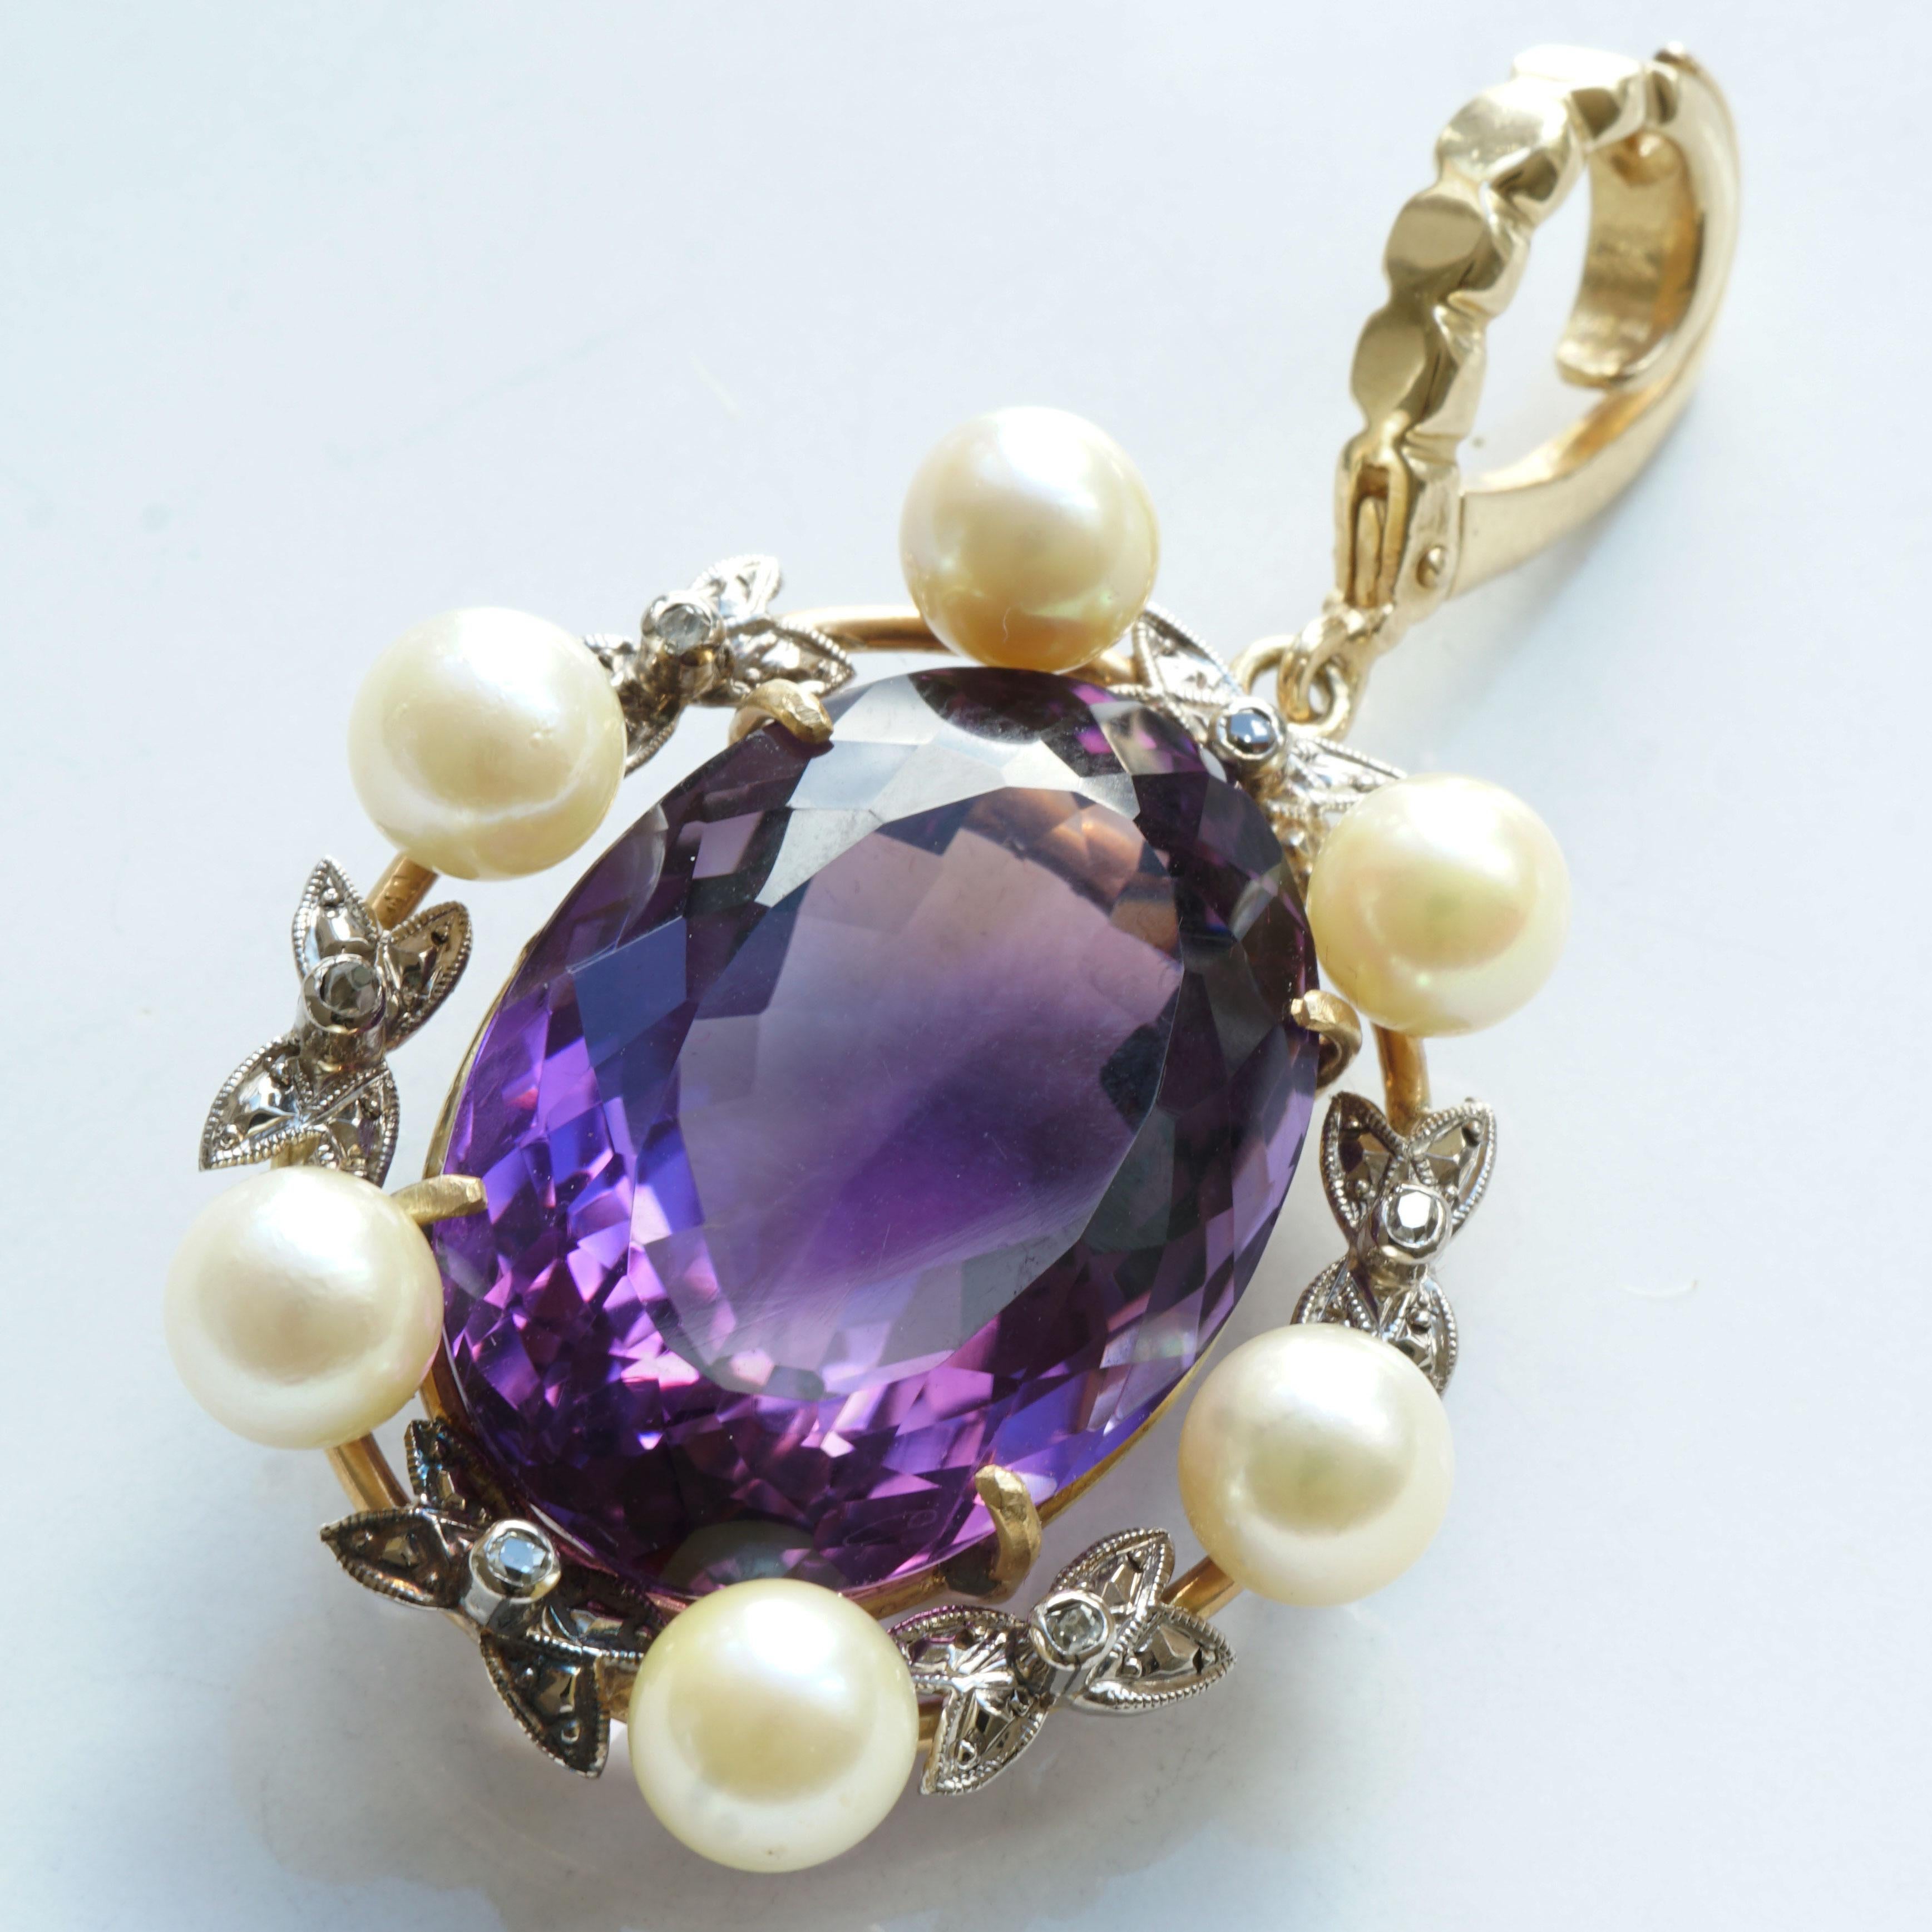 what a great amethyst of 25 ct, AAA+, purple with red parts, 24 x 17.5 mm in size, delightfully bordered with small bows alternating with white Akoya cultured pearls of 6 mm diameter, set with 6 rhodium-plated rose-cut diamonds, clip in 585 yellow